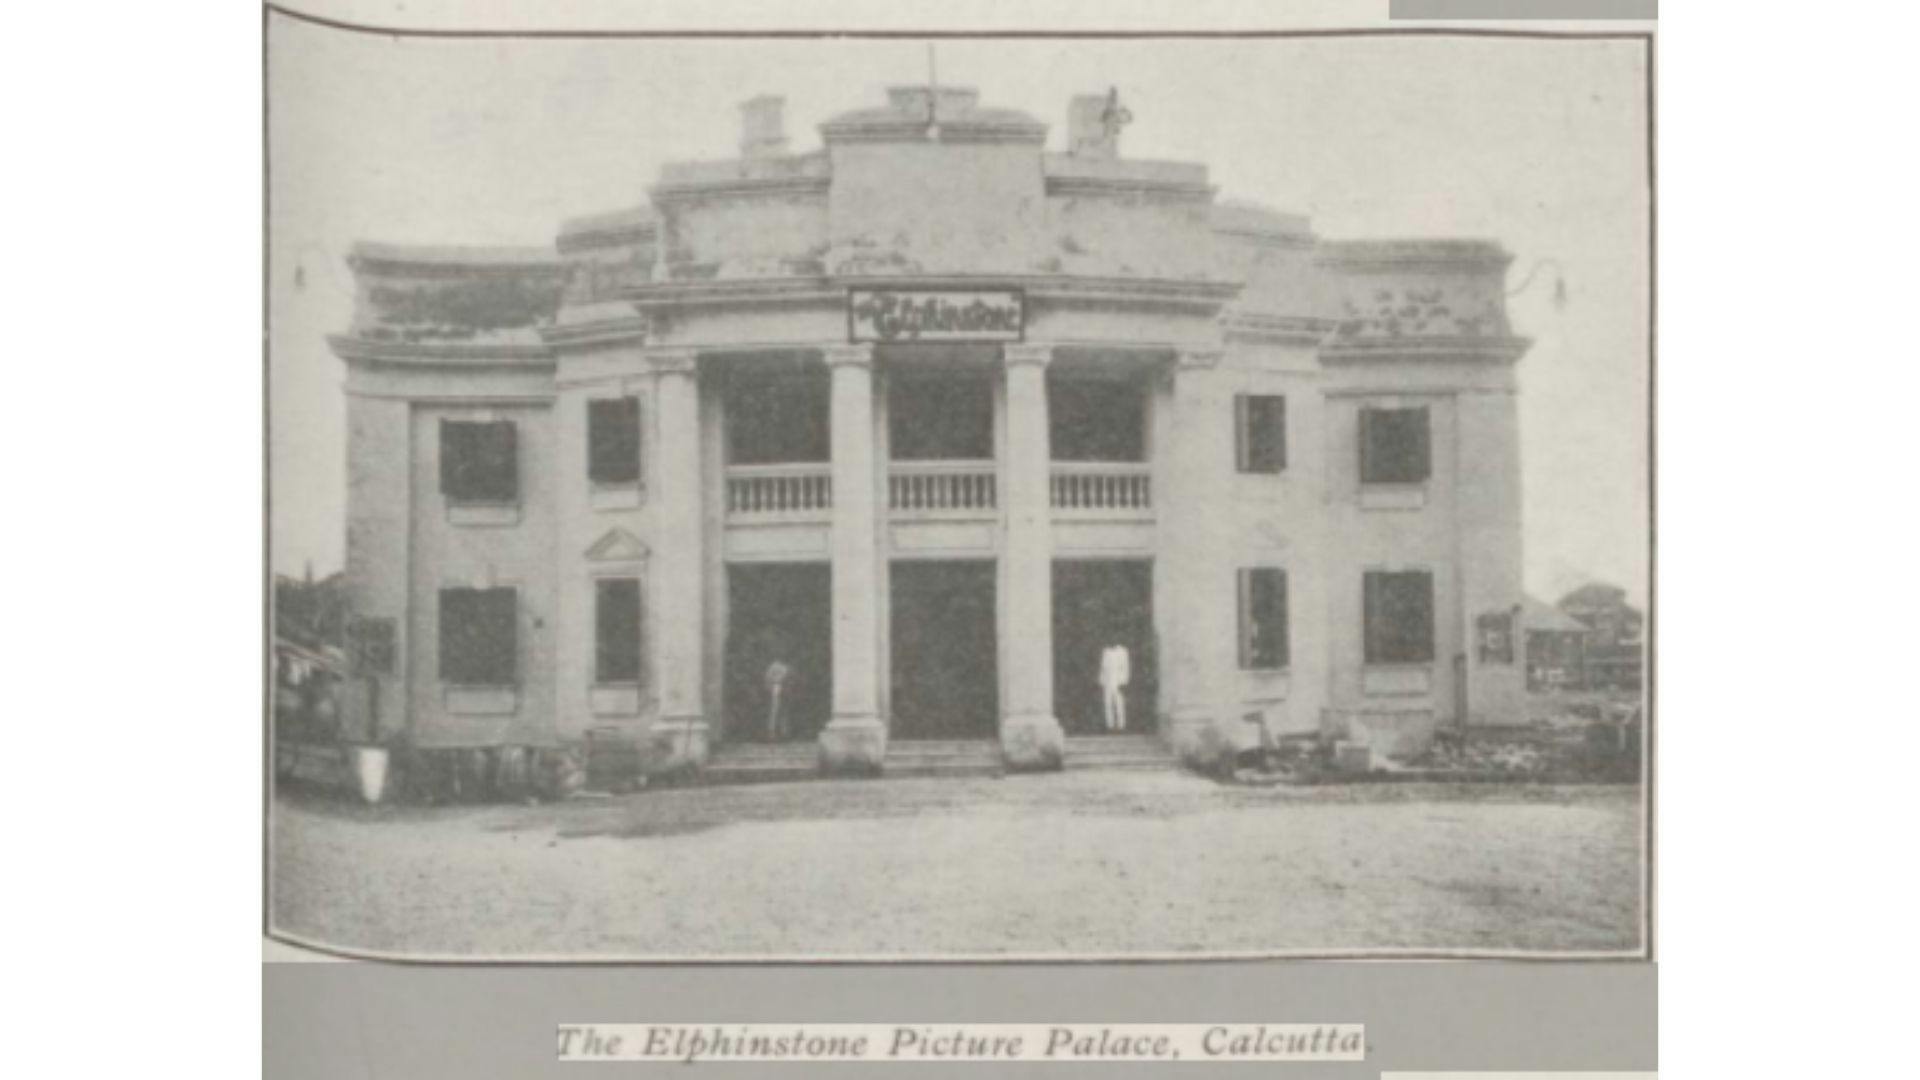 Elphinstone Picture Palace in Calcutta | Wikimedia Commons